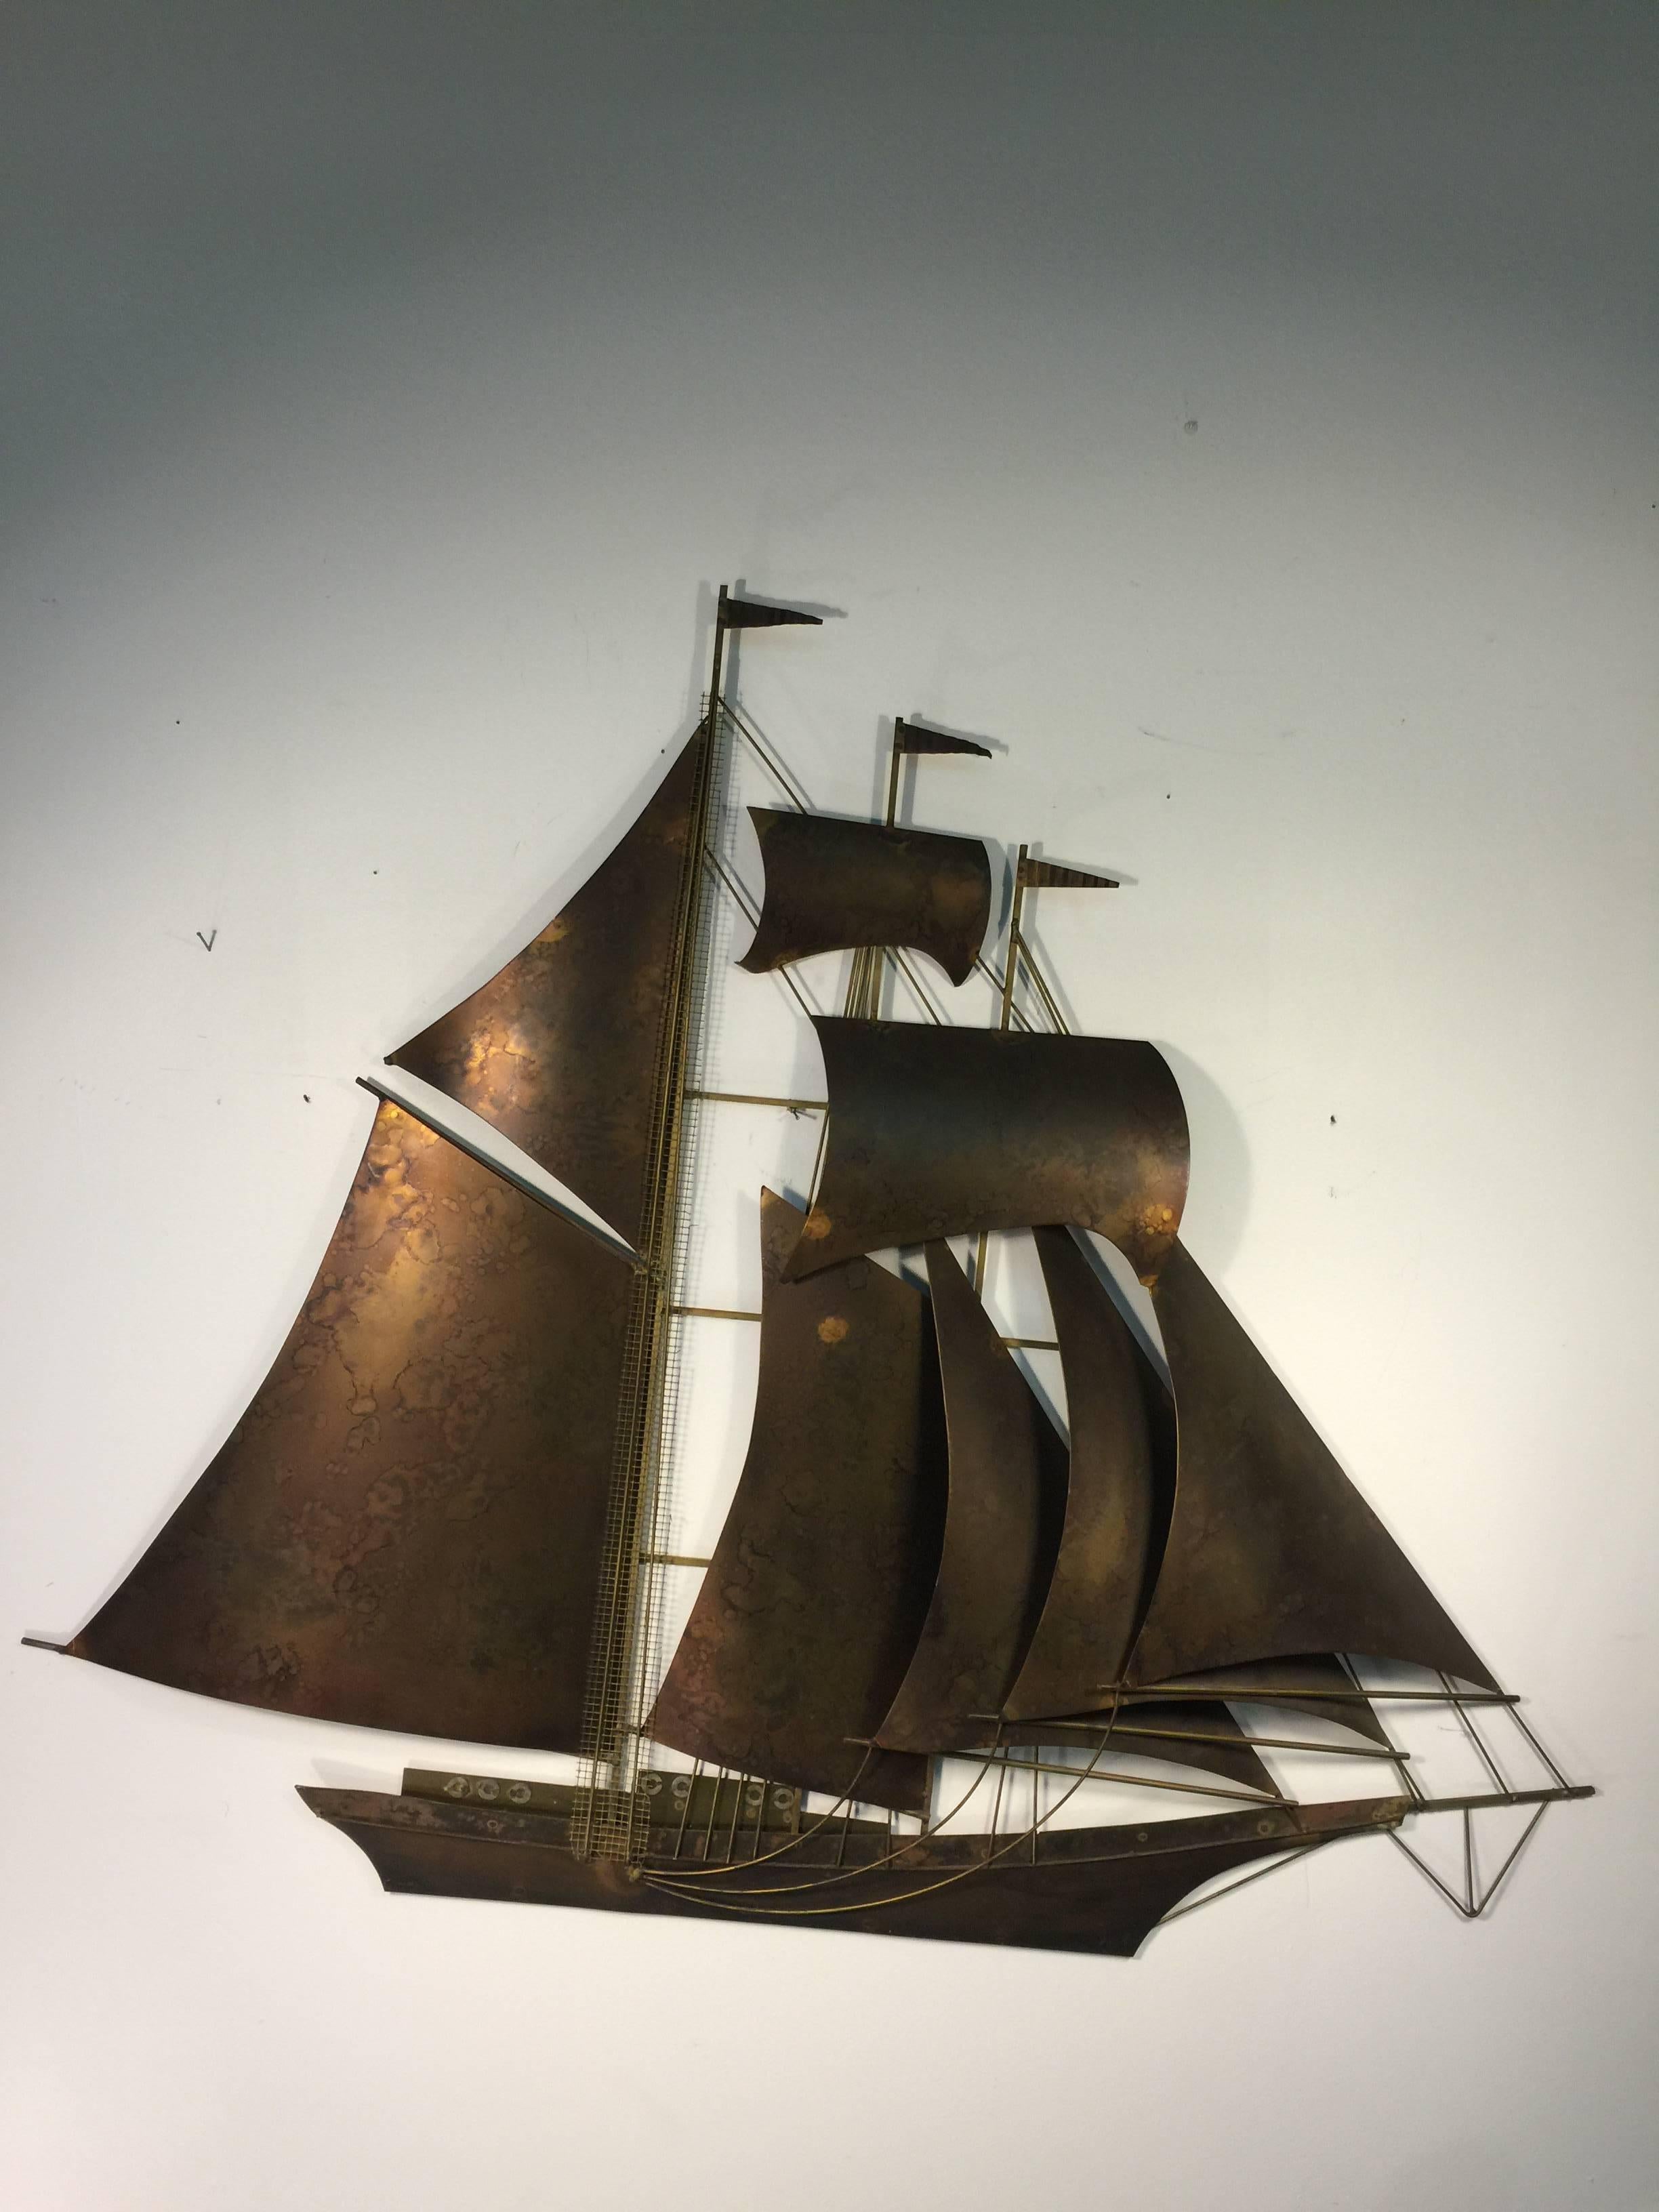 A Brutalist Monumental Burnished Copper Ship by Curtis Jere created in the 1970's.Large Scale with Nautical Modern Appeal To add drama to your Wall.